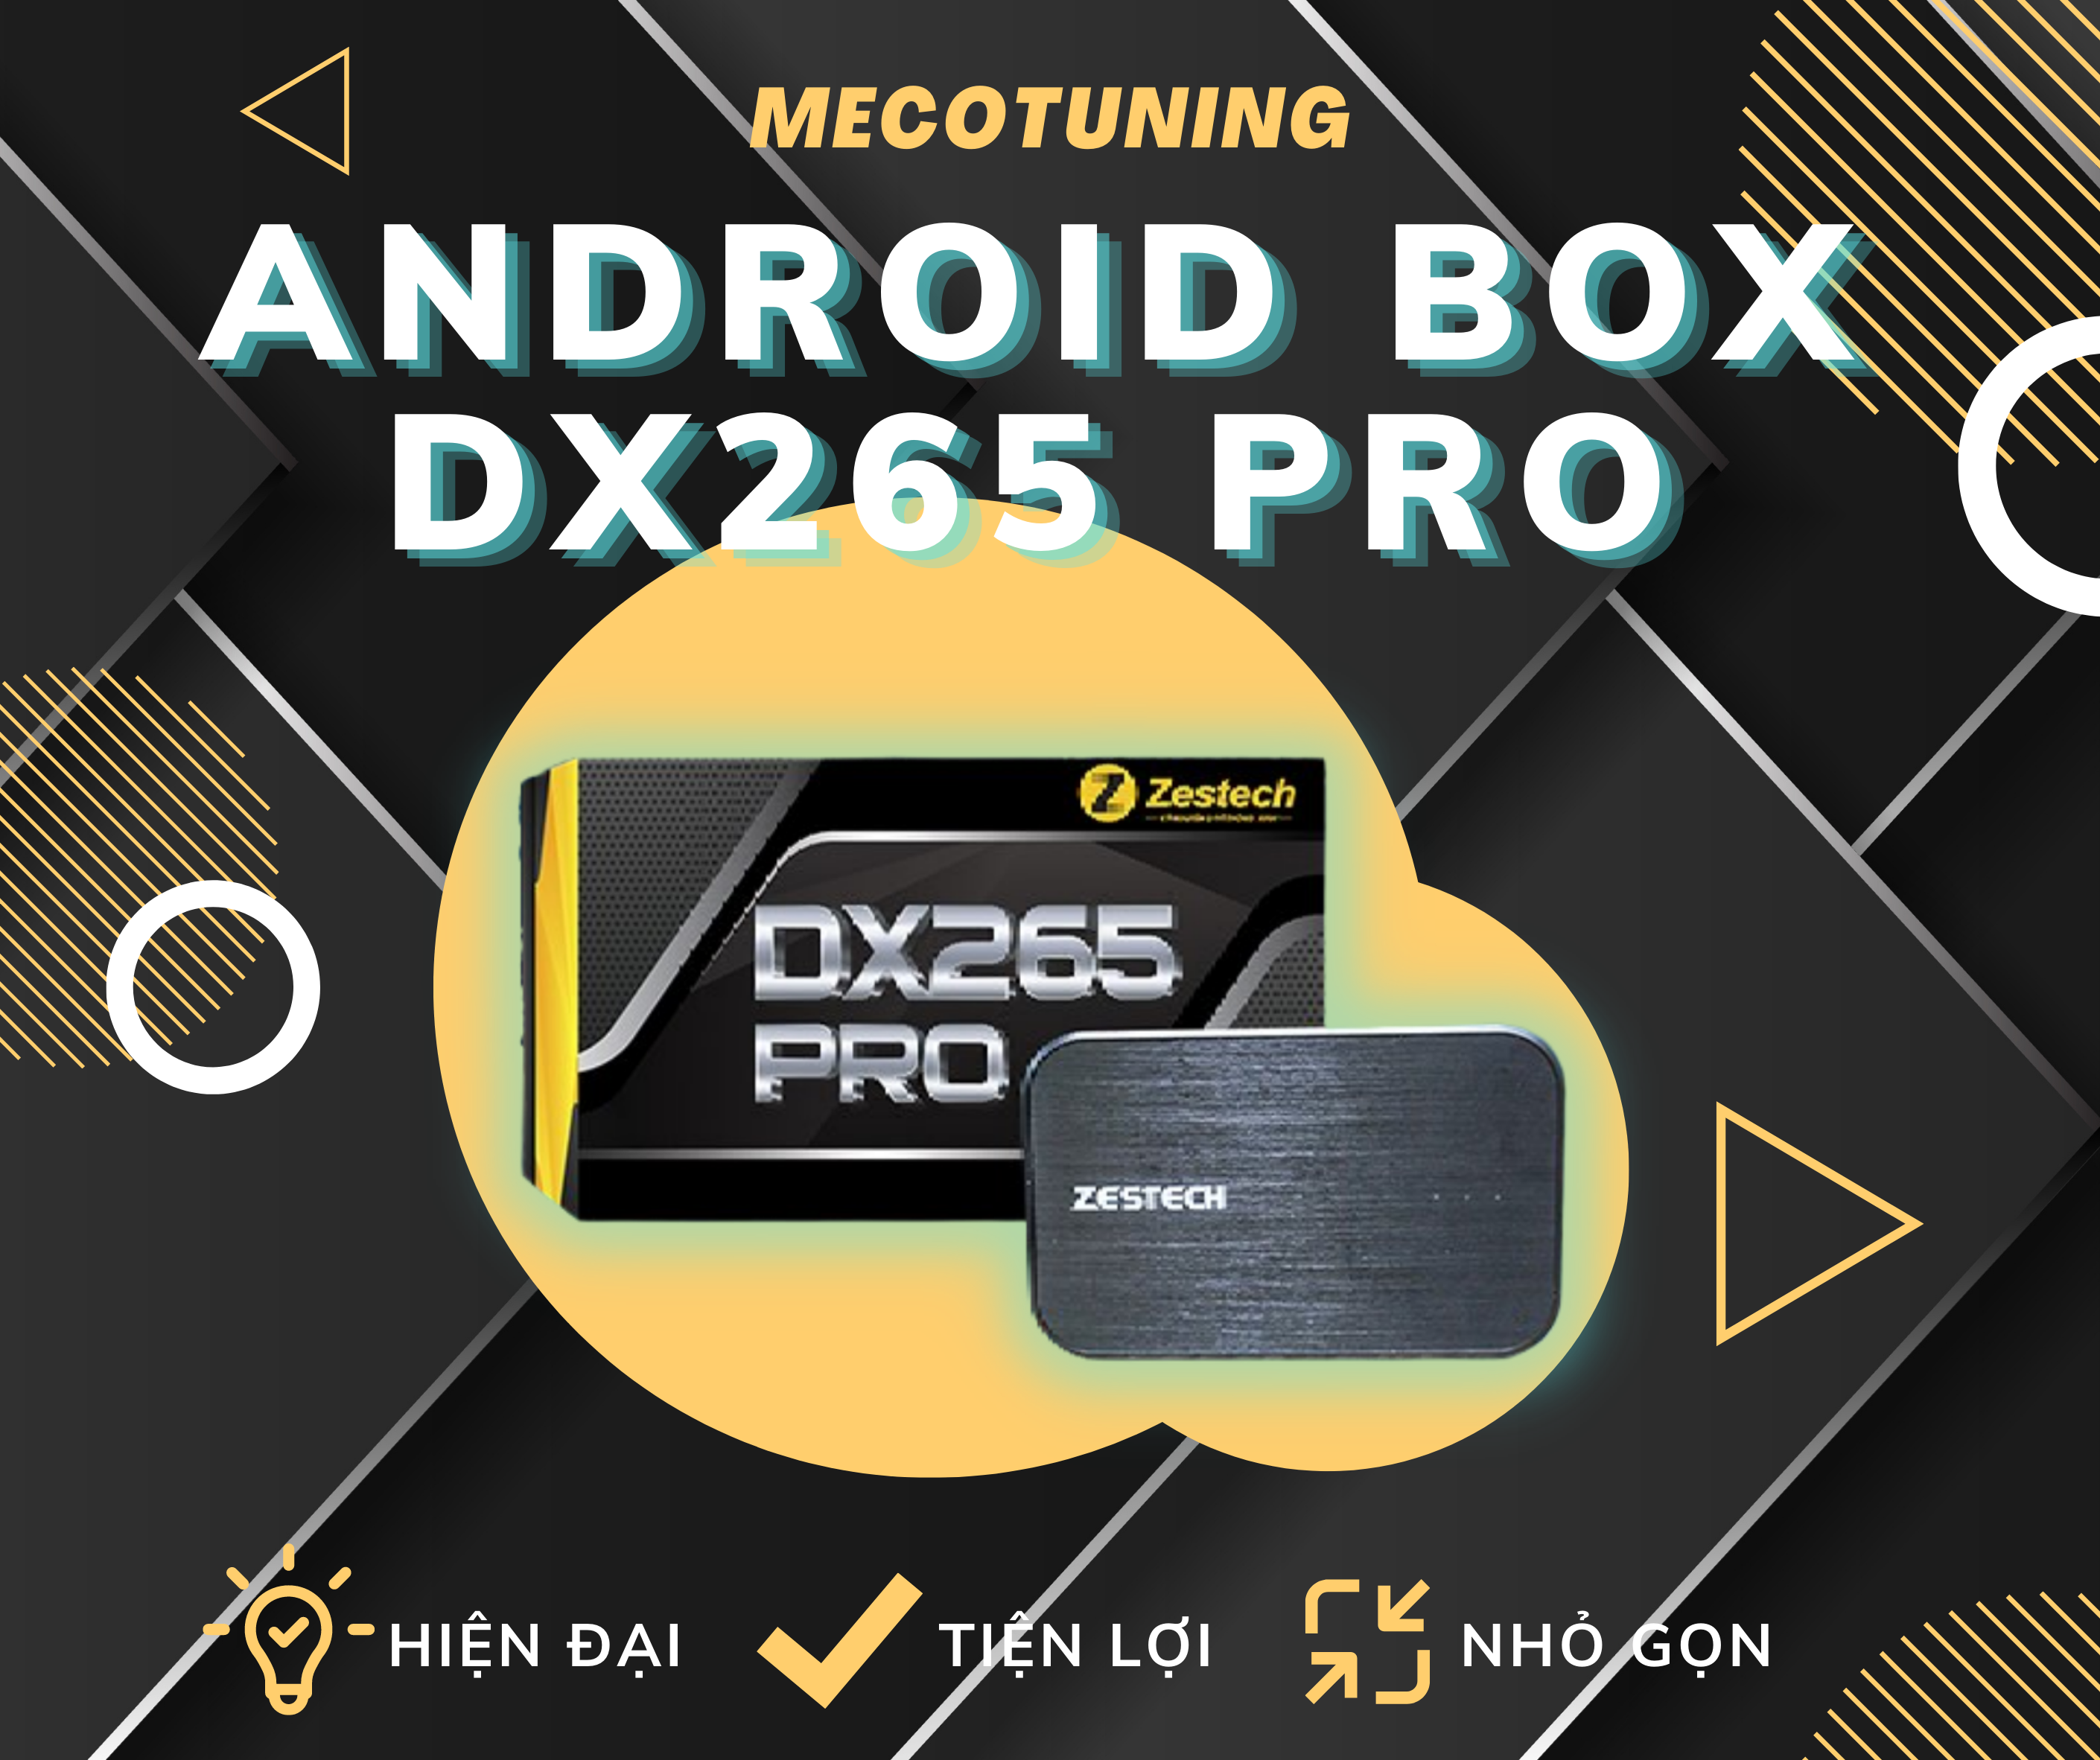 Android box DX265 PRO